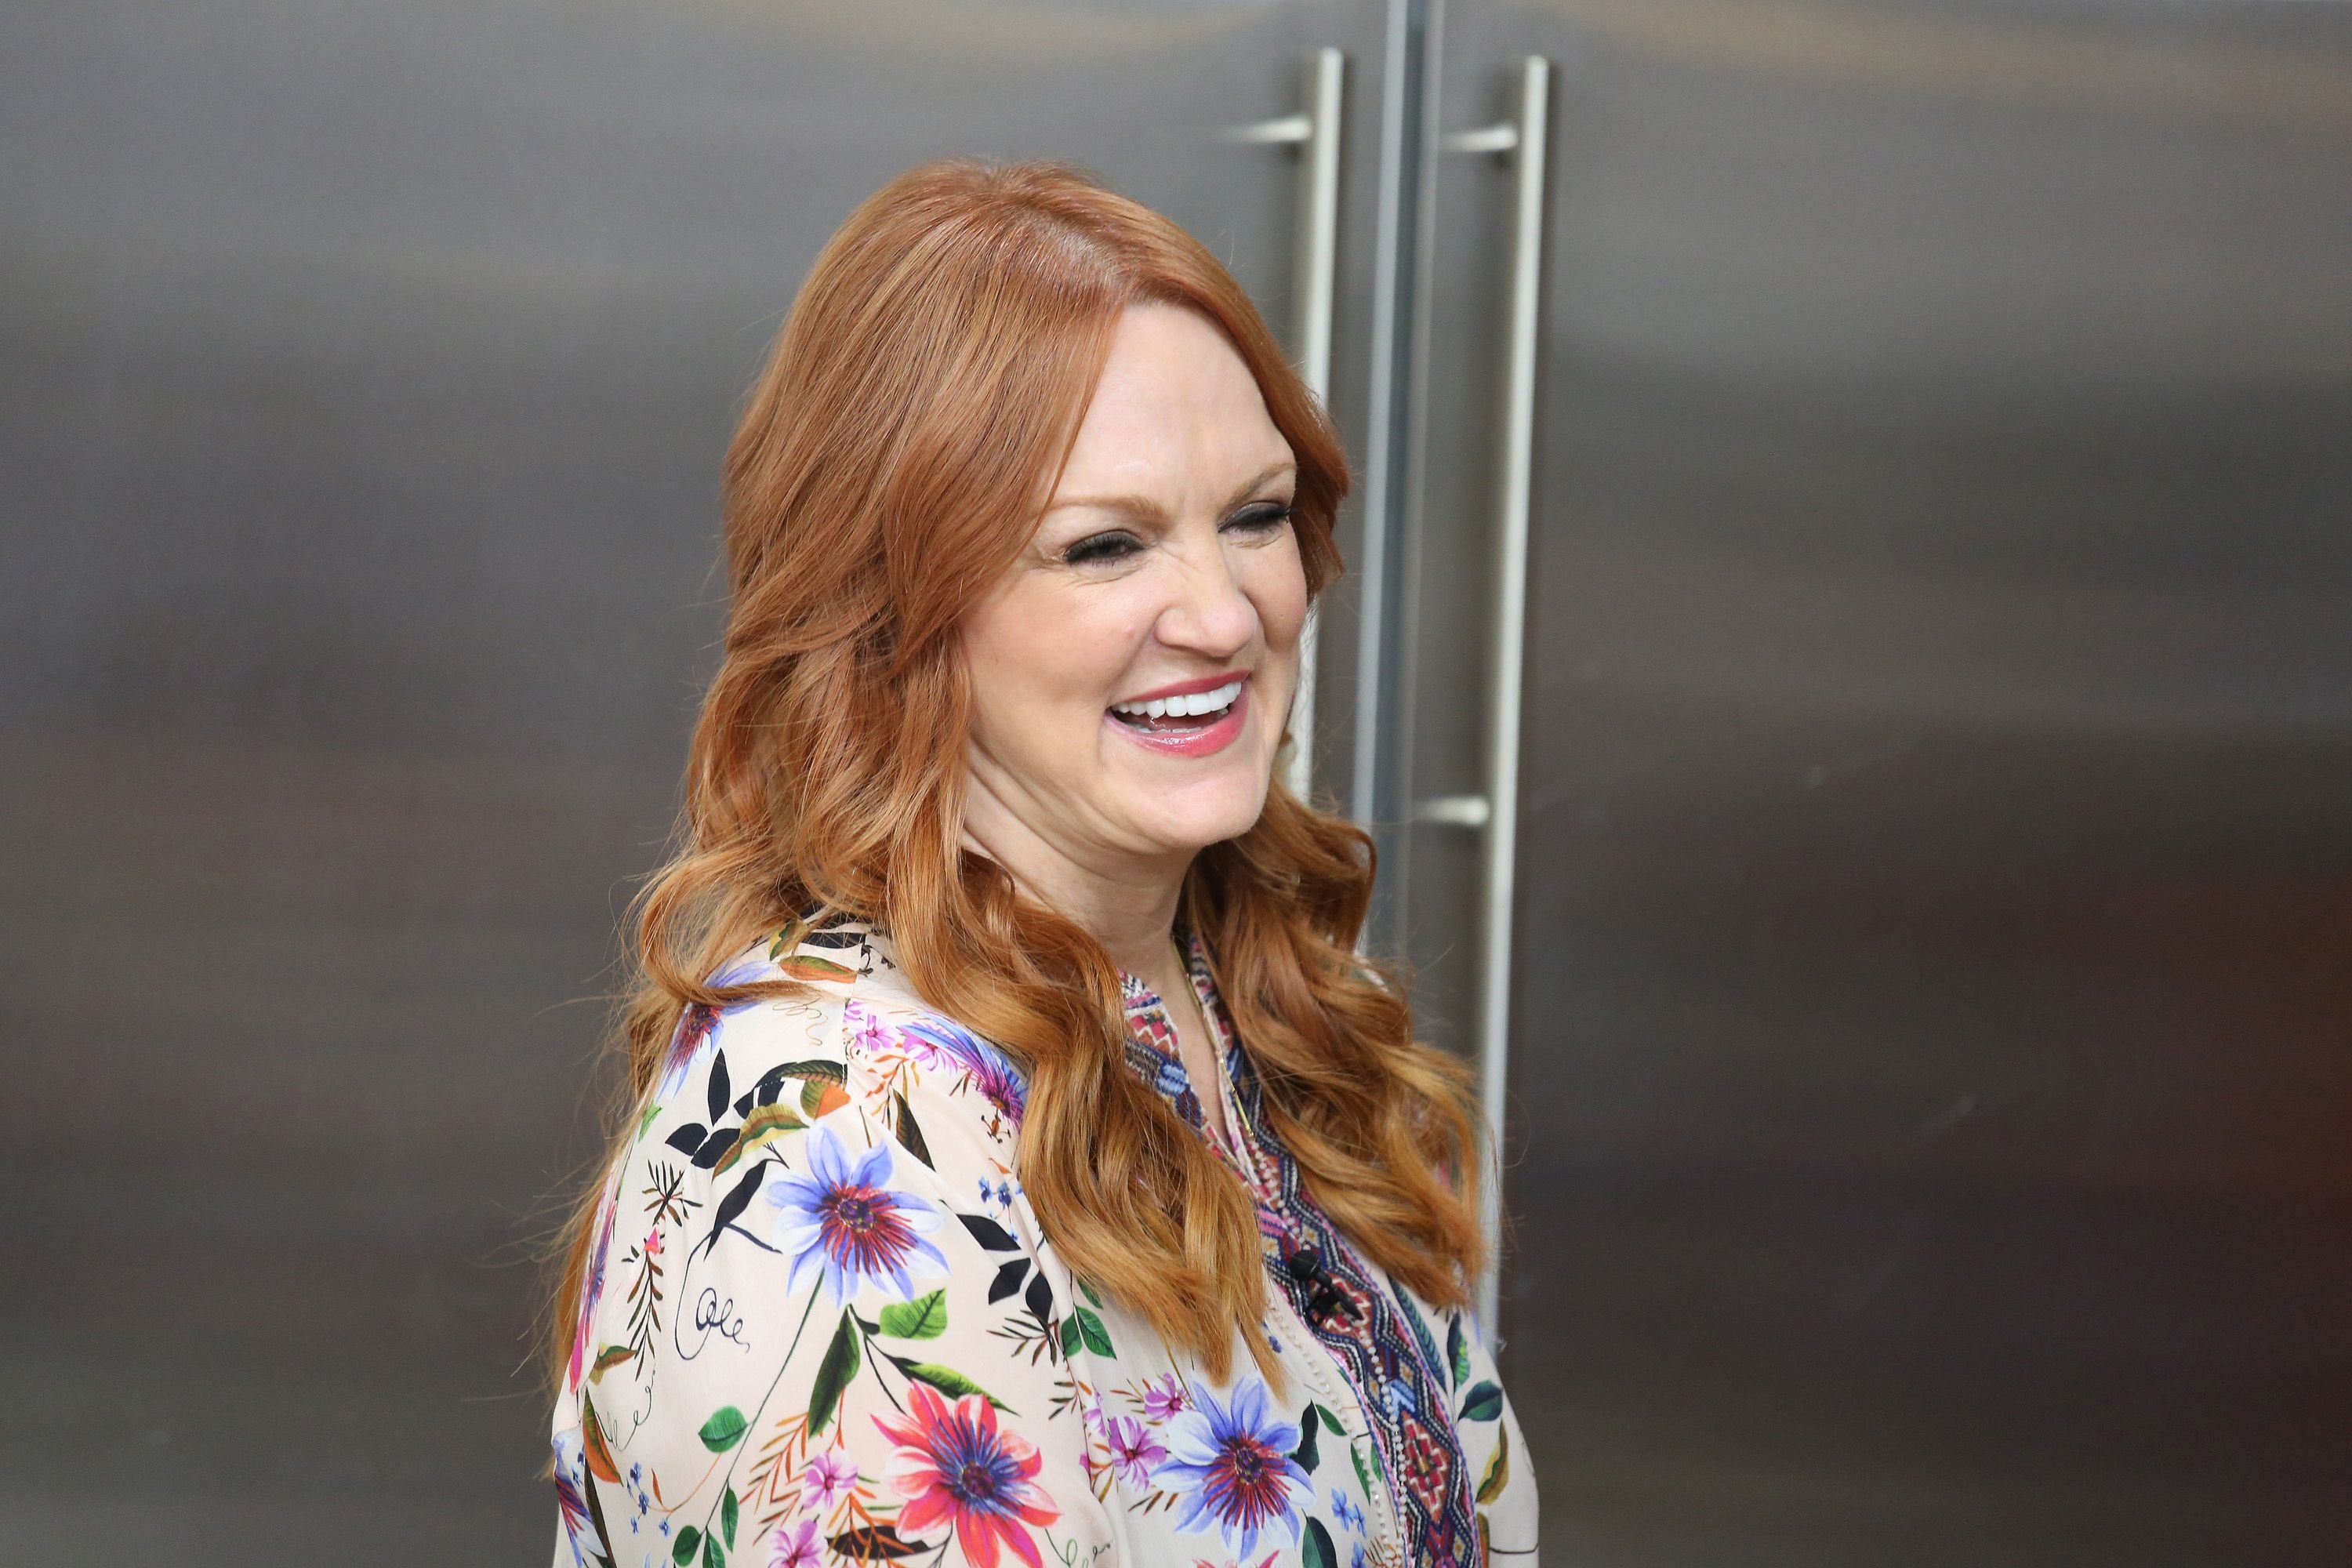 Ree Drummond at the 68th season of "Today" show on Tuesday October 22, 2019 | Photo: Getty Images